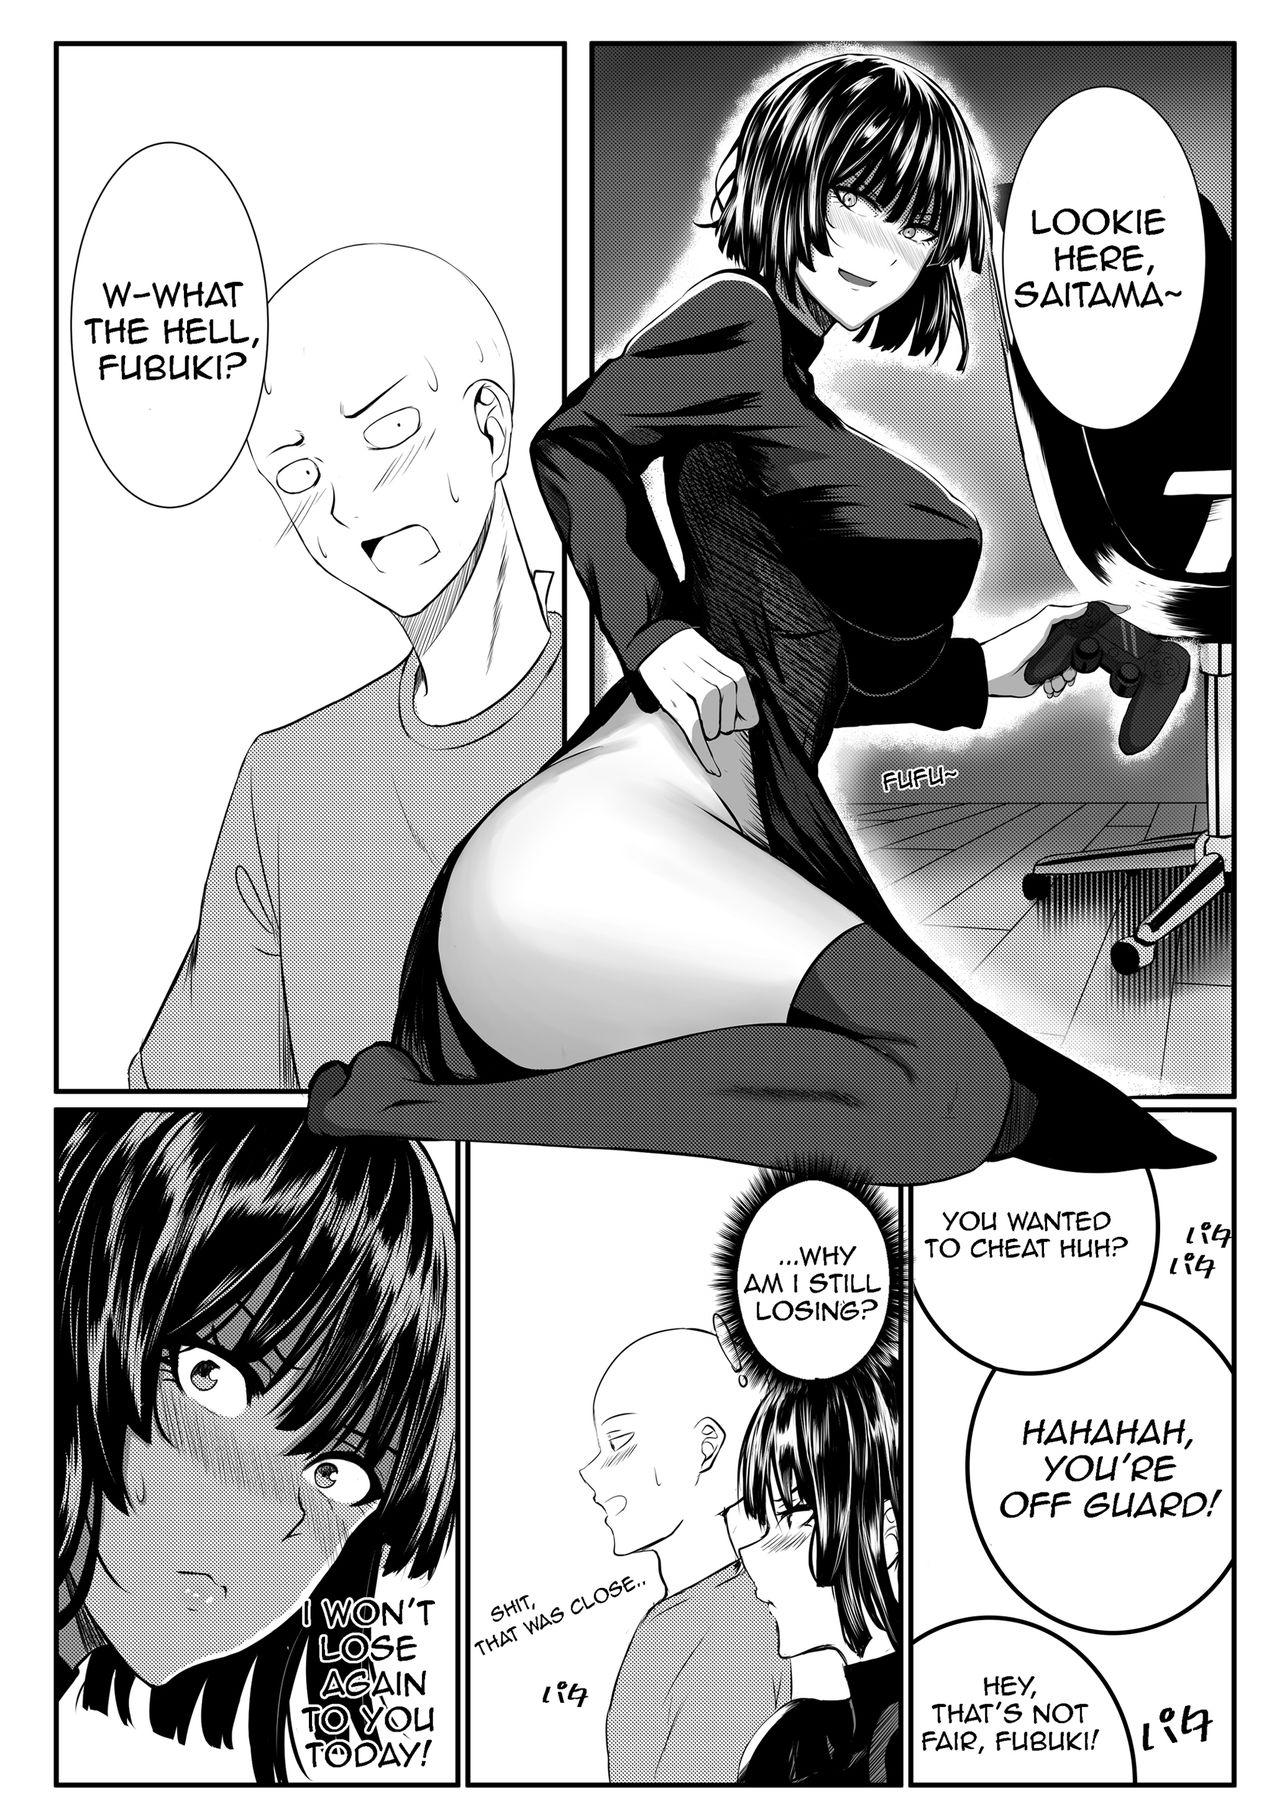 Stepdad ONE THRUST-MAN - One punch man Hot Girl Fucking - Page 7